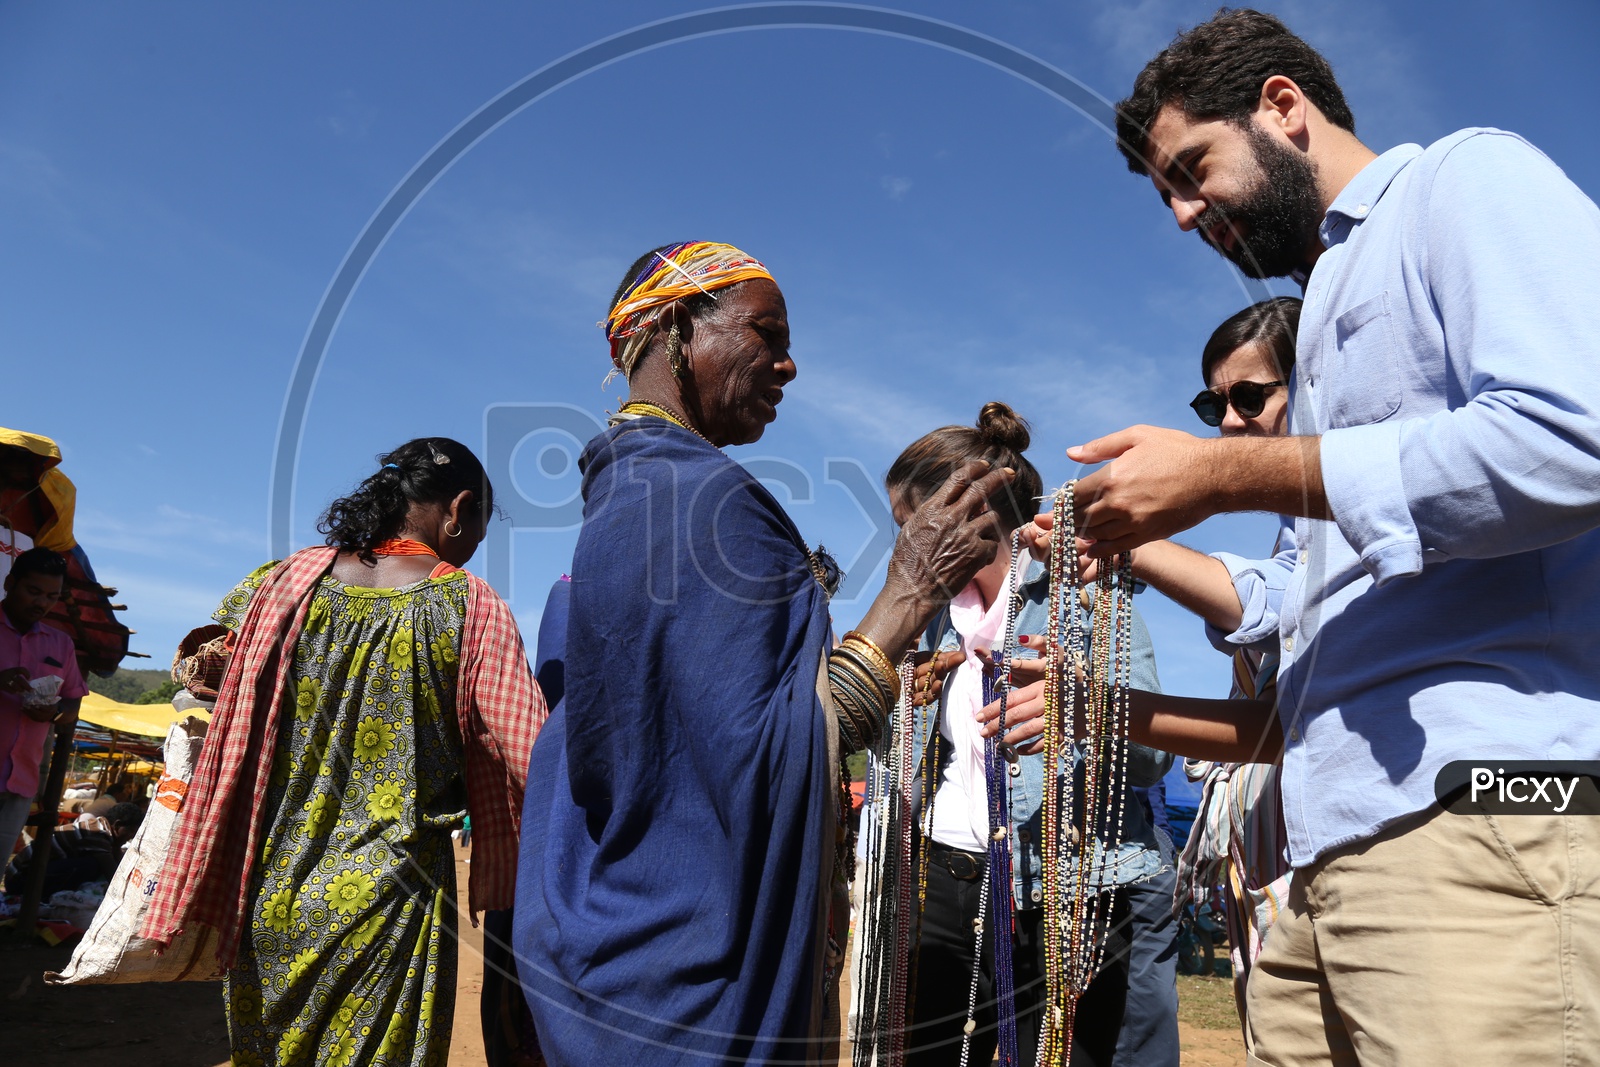 Foreigners Or tourists Purchasing Handmade Art Crafts  From Bonda Tribal Woman In tribal Village flea Market